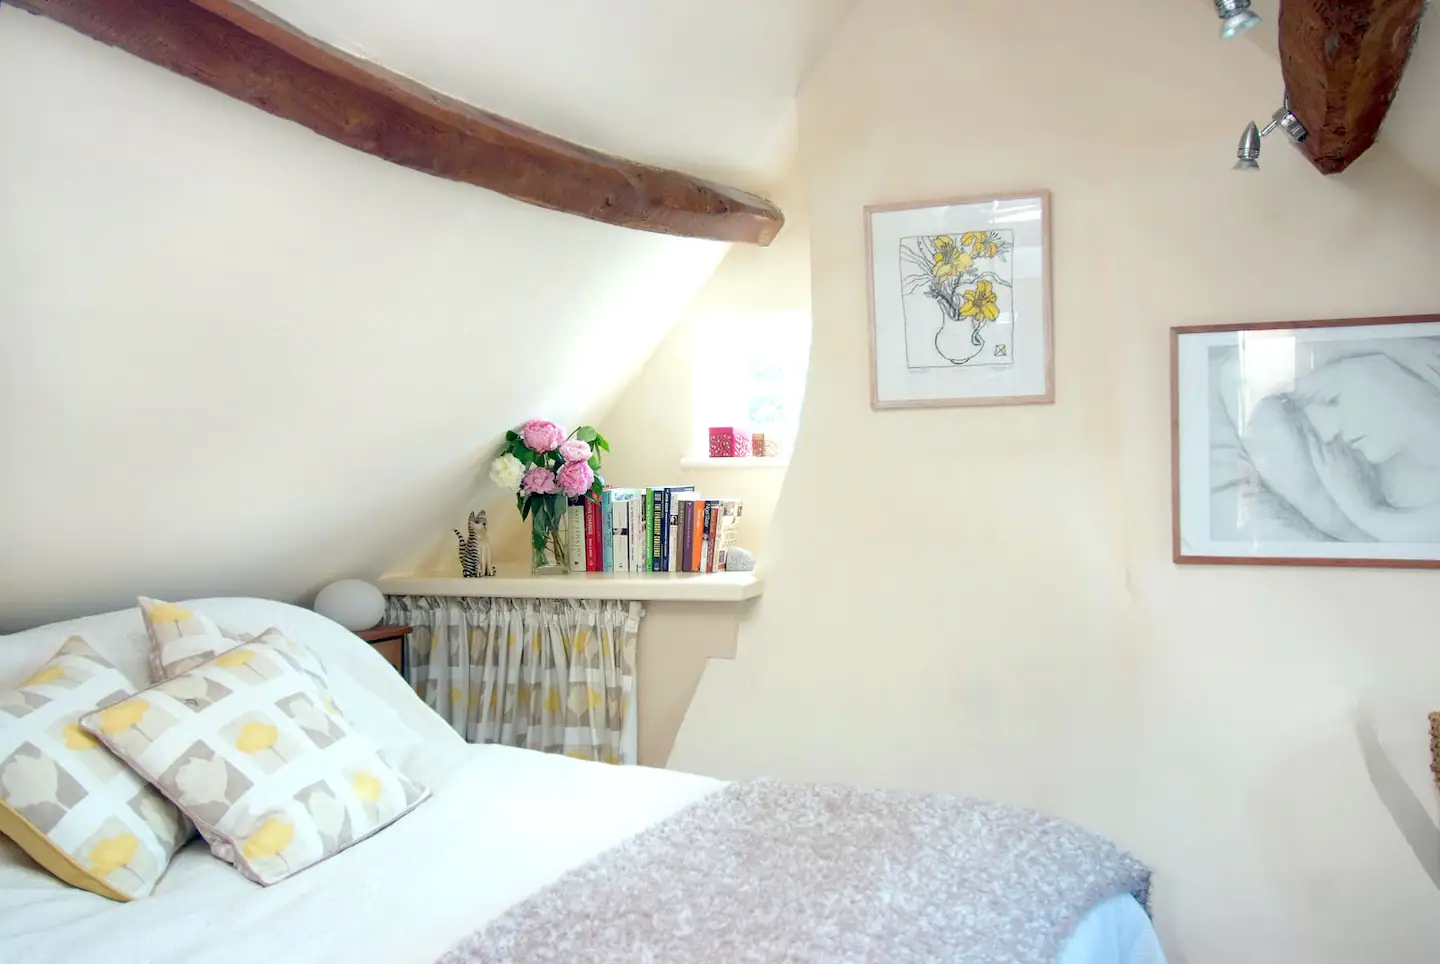 A charming rural bedroom with cotton bedlinen, sprting down, a down and feather blanket, and pillows (there are also synthetic alternatives)